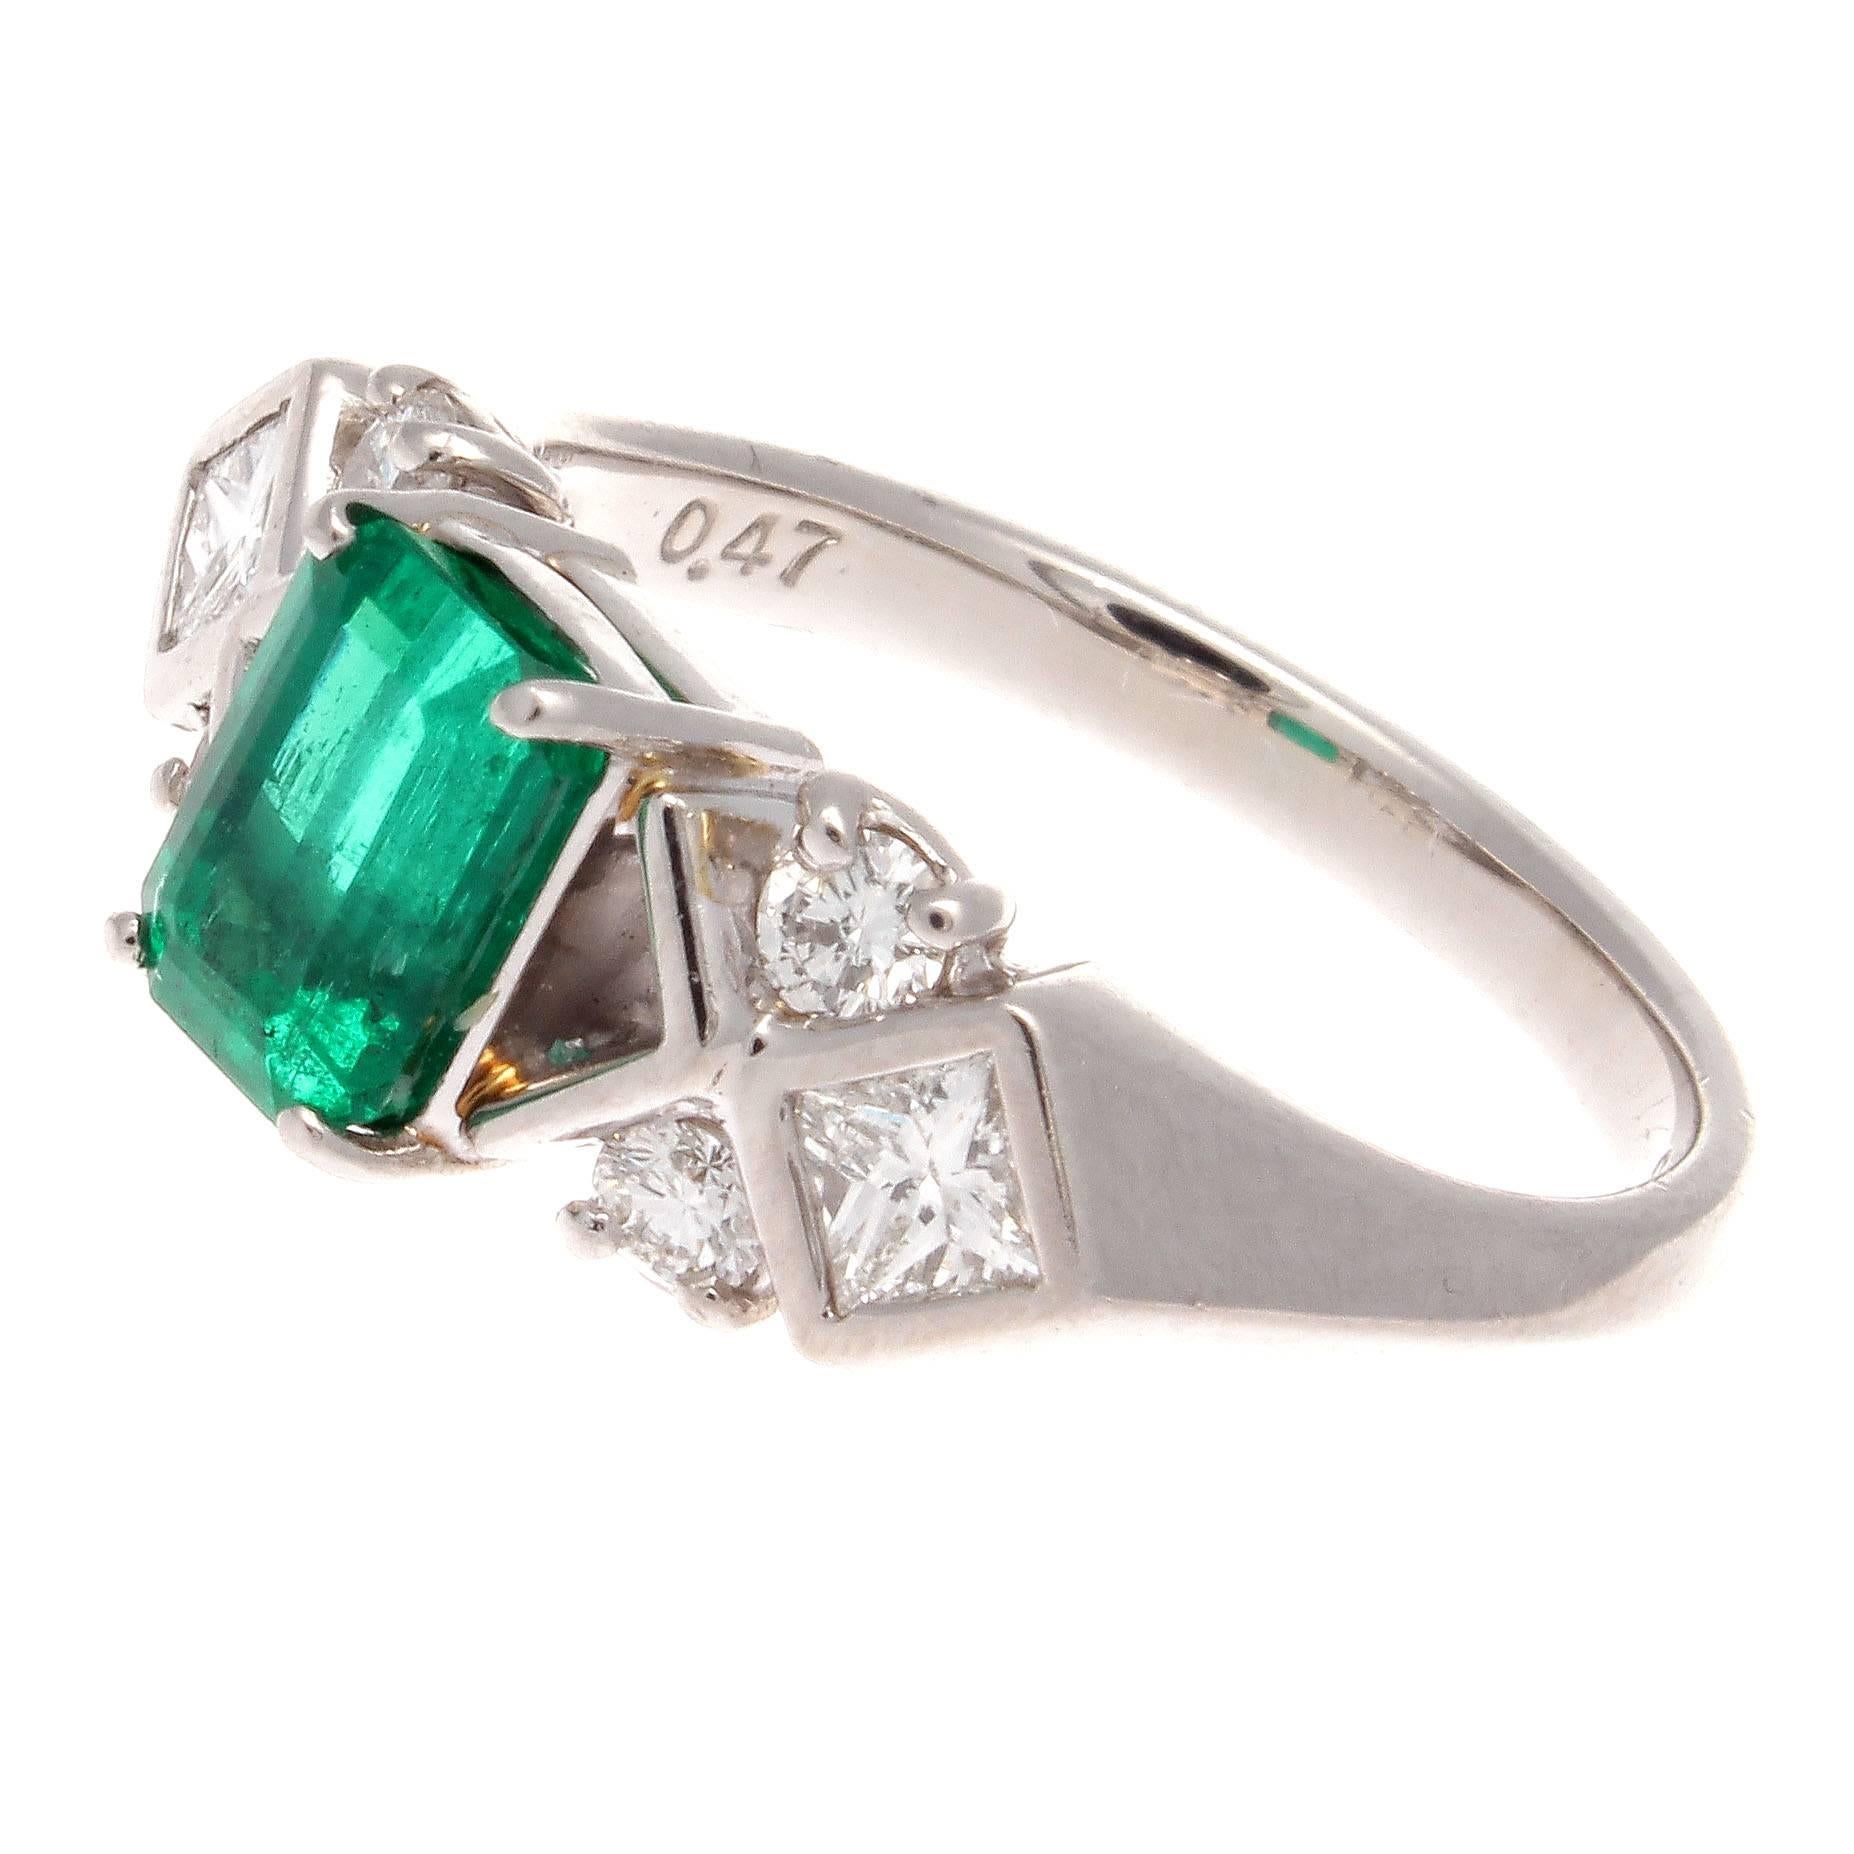 A beautiful modern creation. Infusing eye catching color with eye pleasing symmetrical design. Featuring a 1.06 carat deep forest green Colombian emerald accented by a mixture of square and round cut near colorless diamonds weighing 0.47 carats.